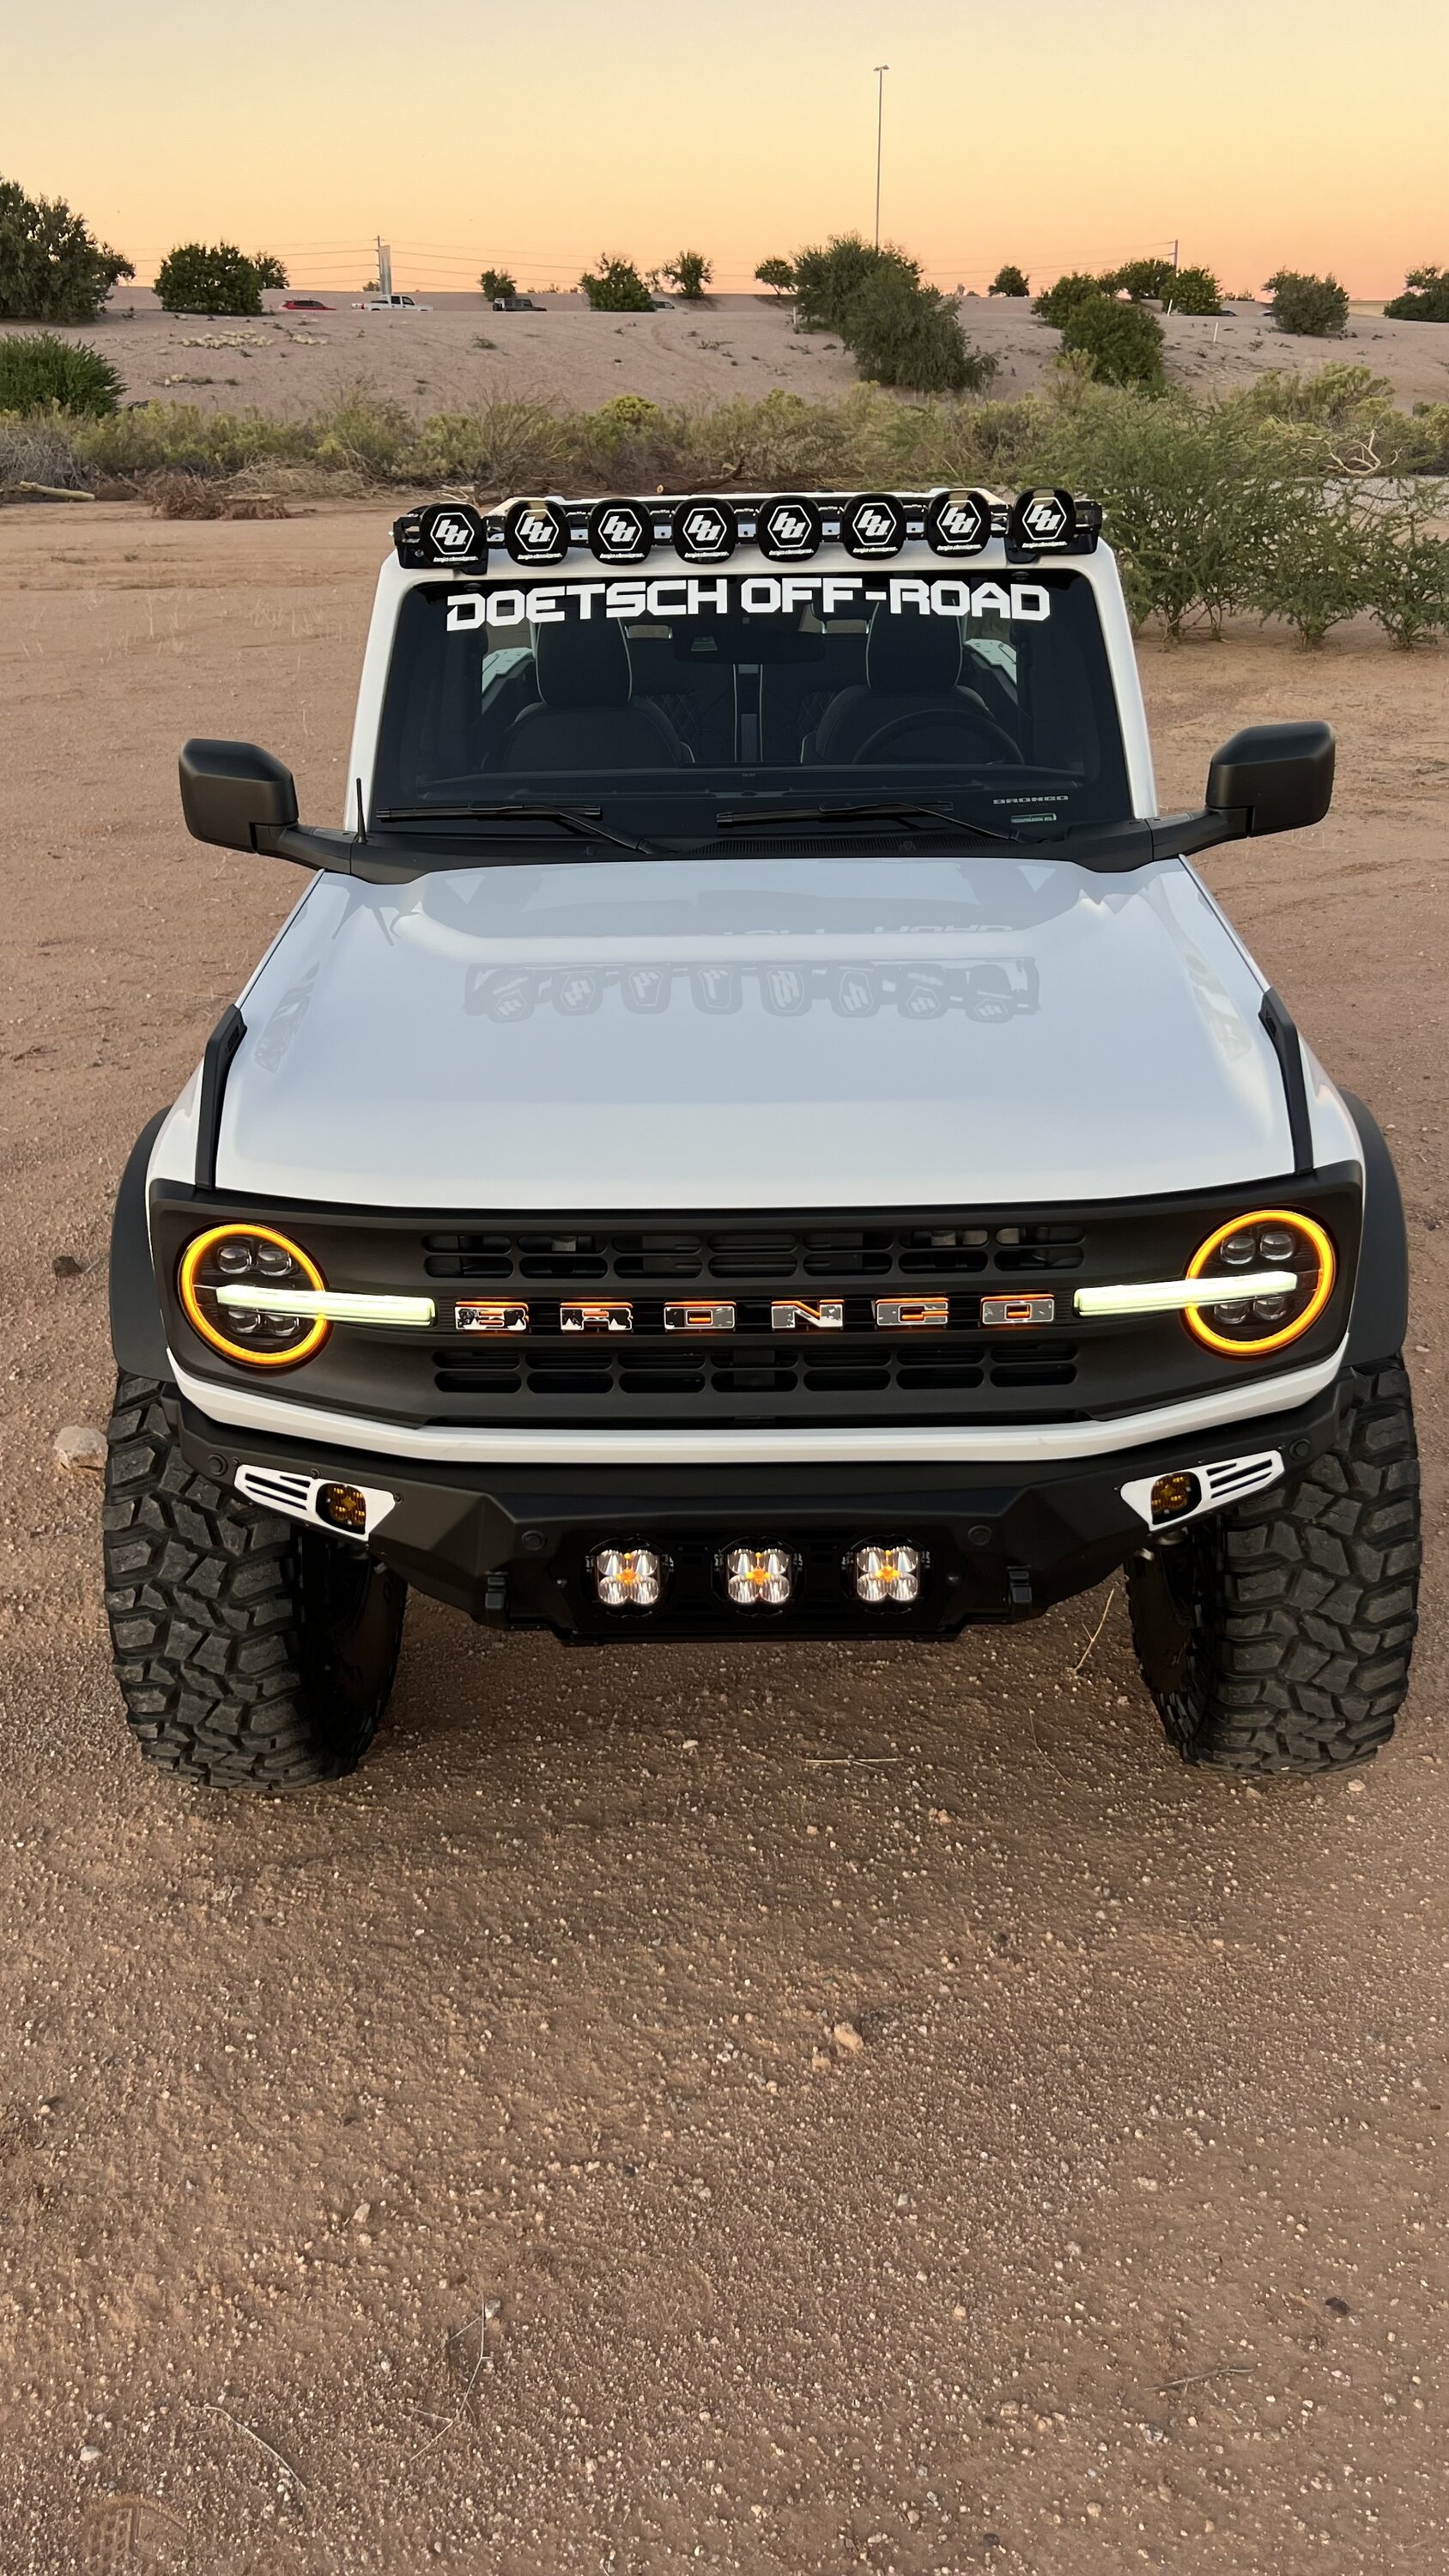 Ford Bronco SEMA 2dr Daily Driver Build on 40s w/ 4.5" Lift - Doetsch OffRoad IMG_9817